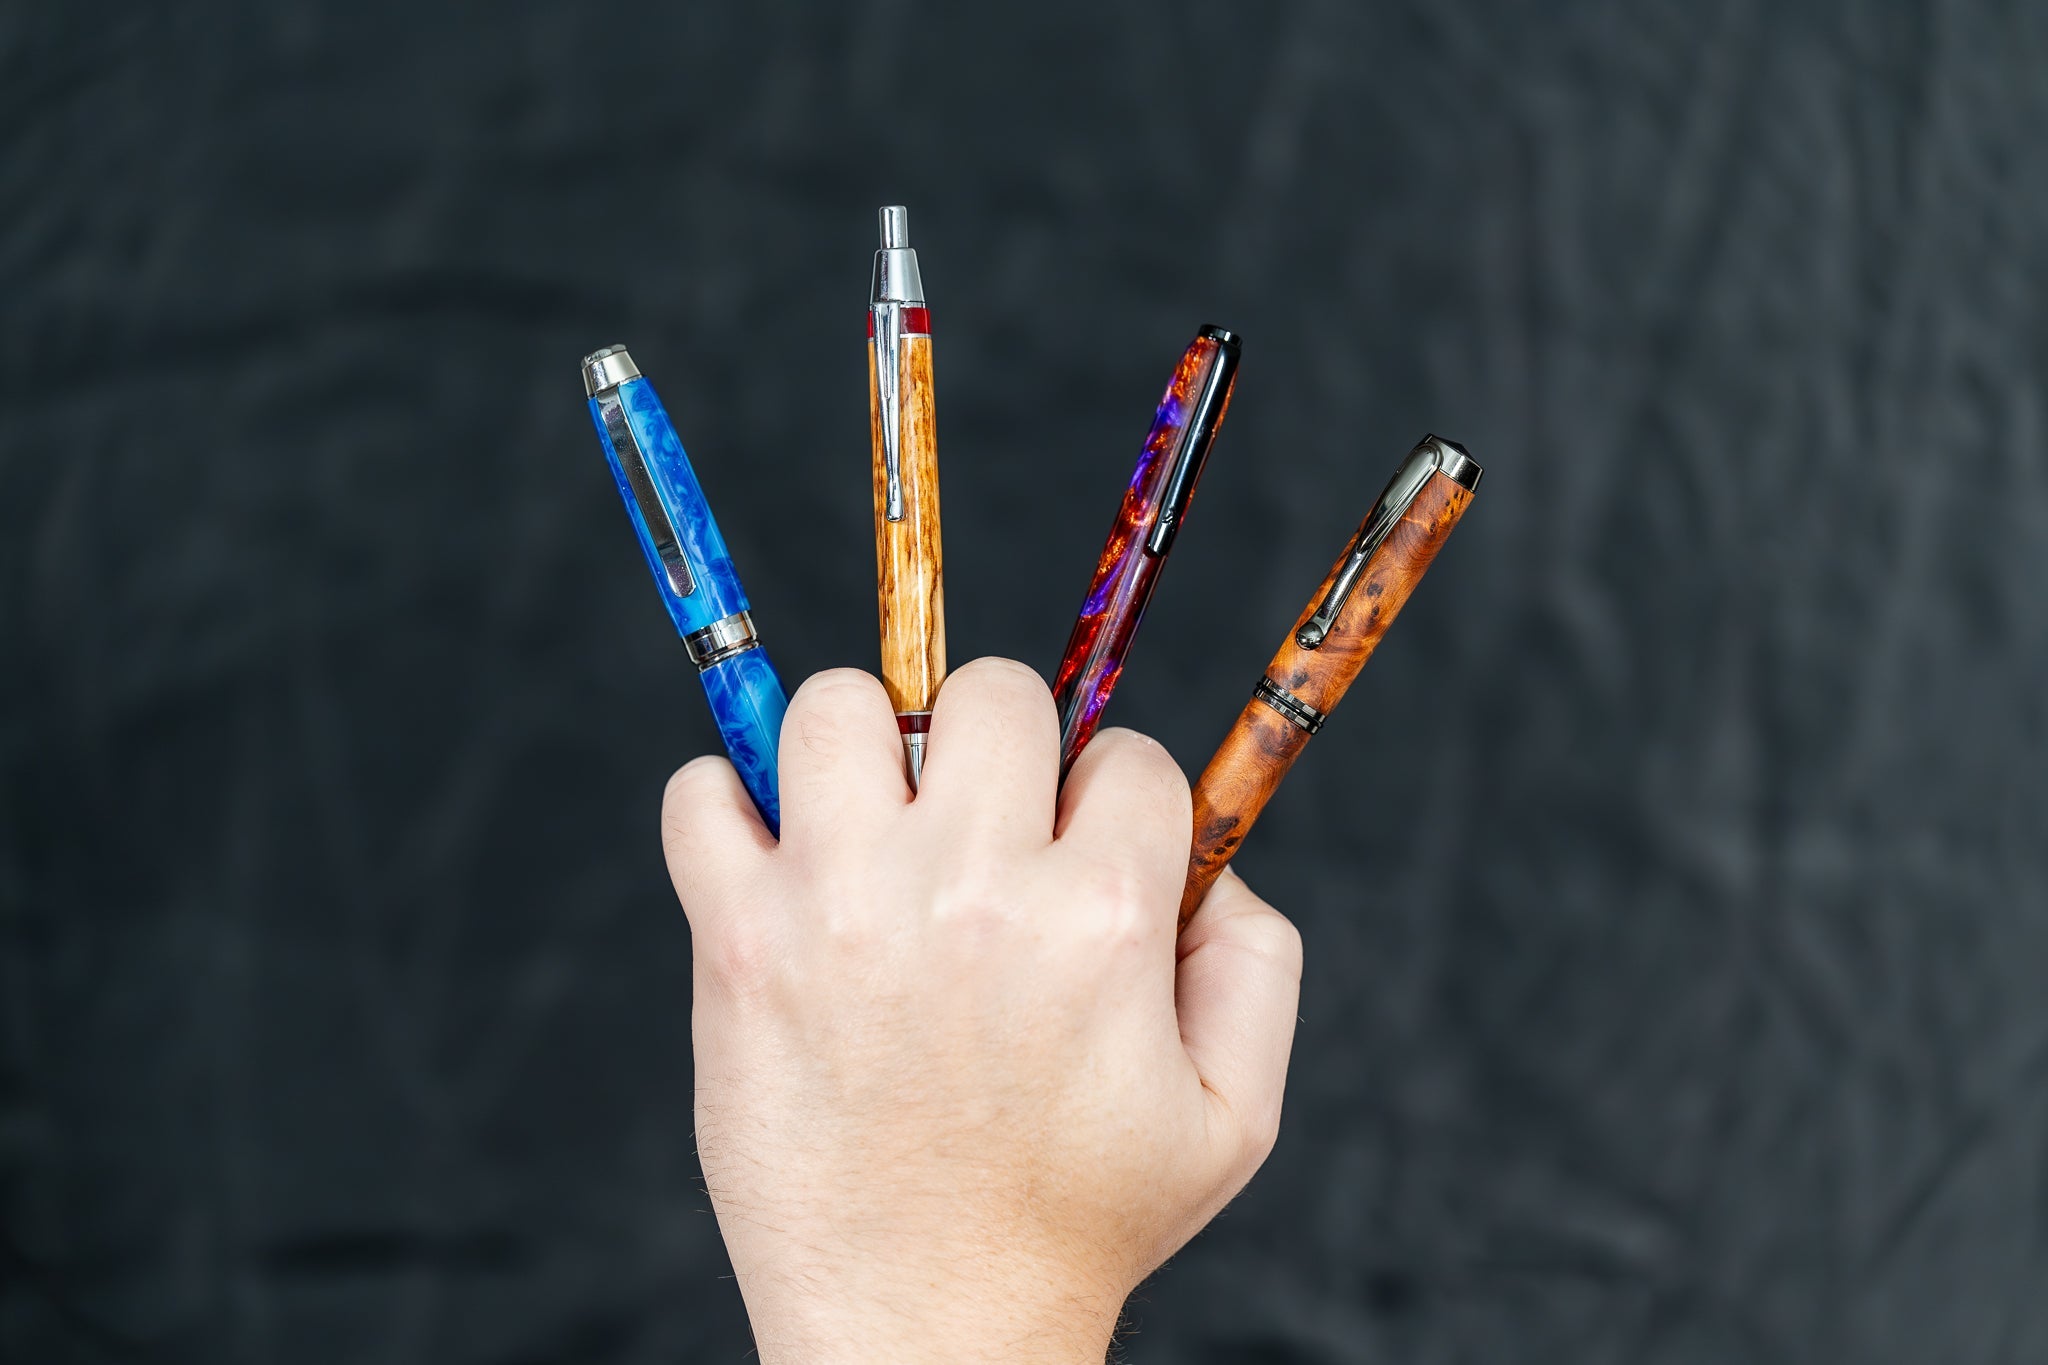 a hand holding four handmade resin, wood, and aluminum pens against a black backgorund